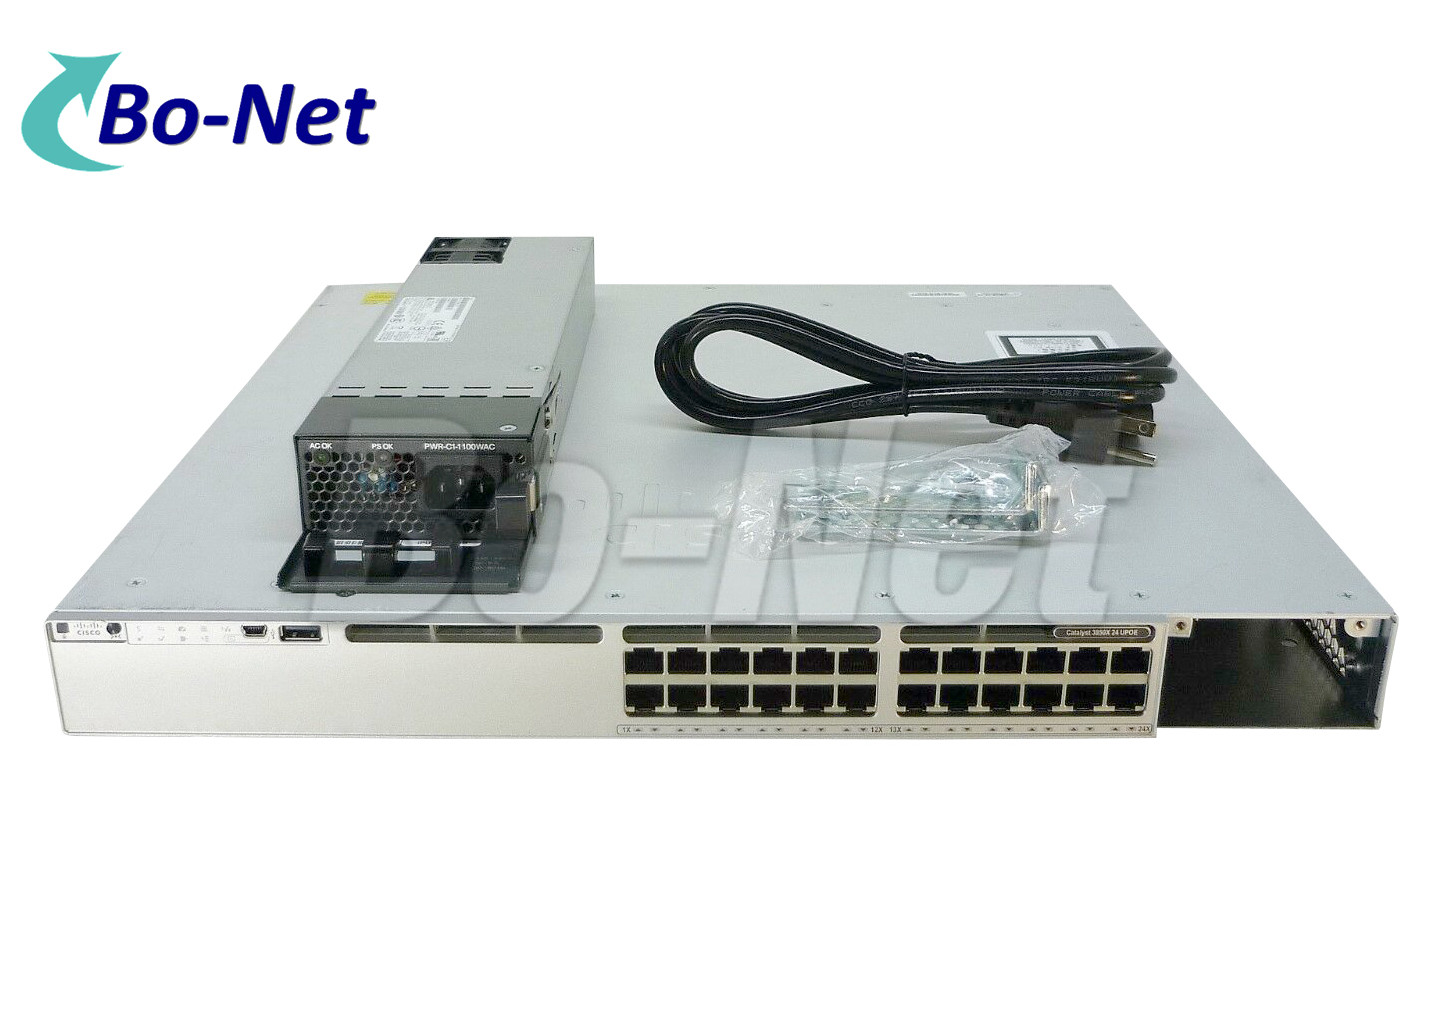 Cheap Cisco Gigabit Switch 9300 series managed switch C9300-24U-E 24-port UPOE, Network Essentials with C9300-DNA-E-24-3Y for sale